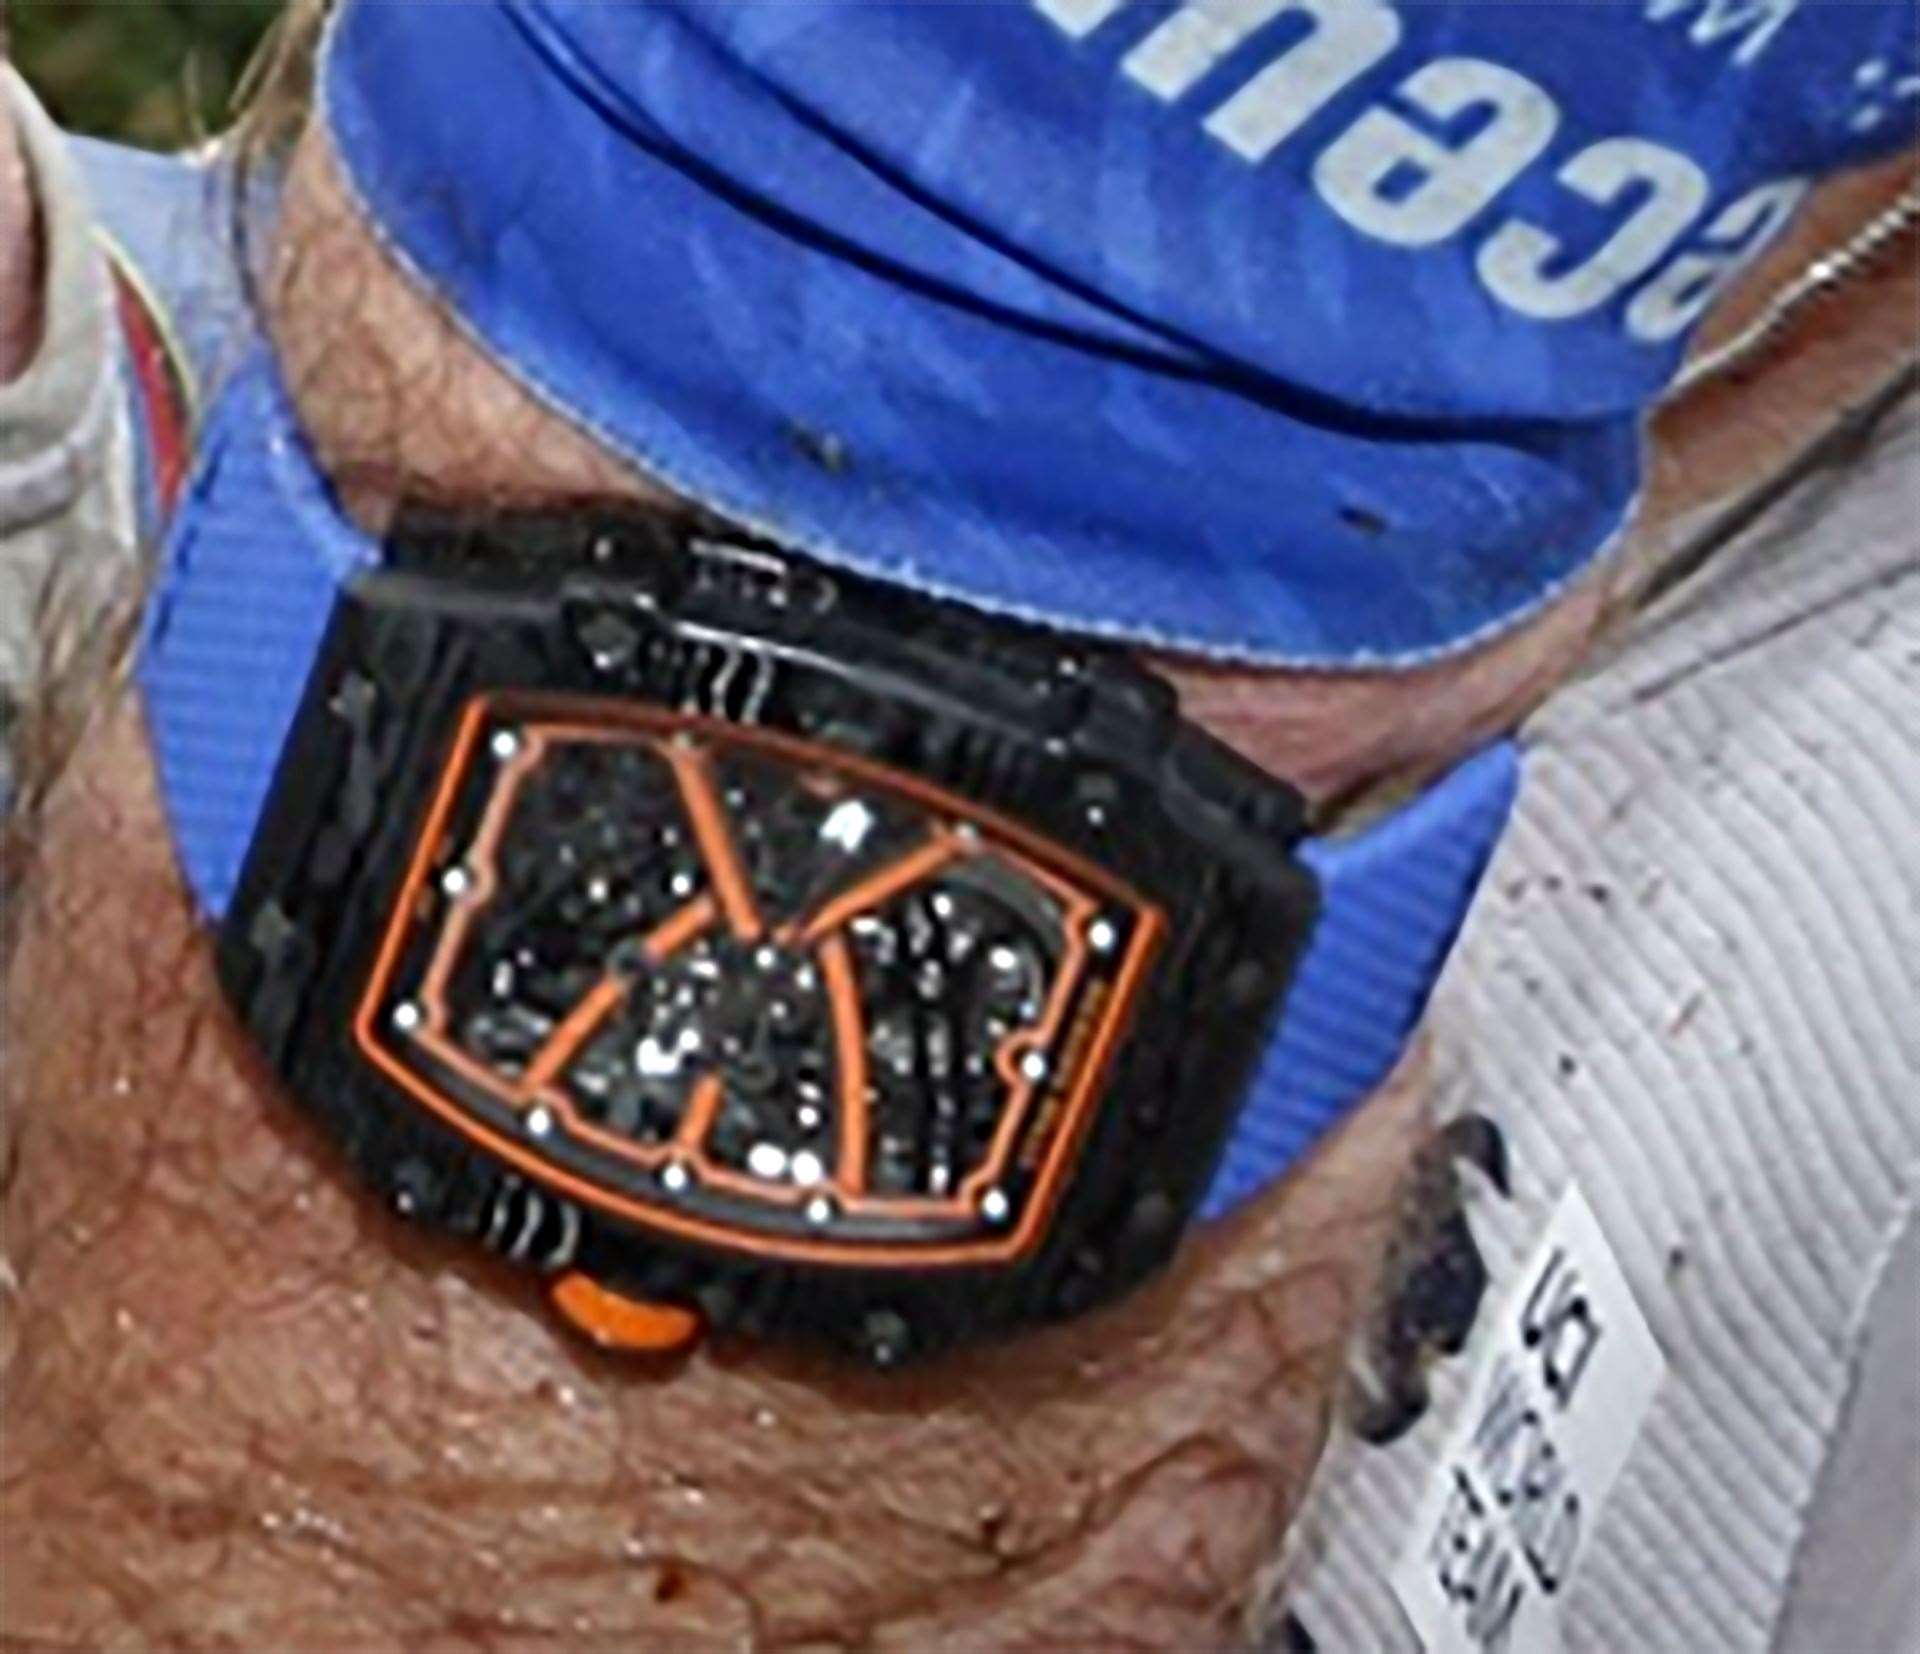 One of the watches stolen in a robbery at the home of Mark Cavendish (Essex Police/ PA)